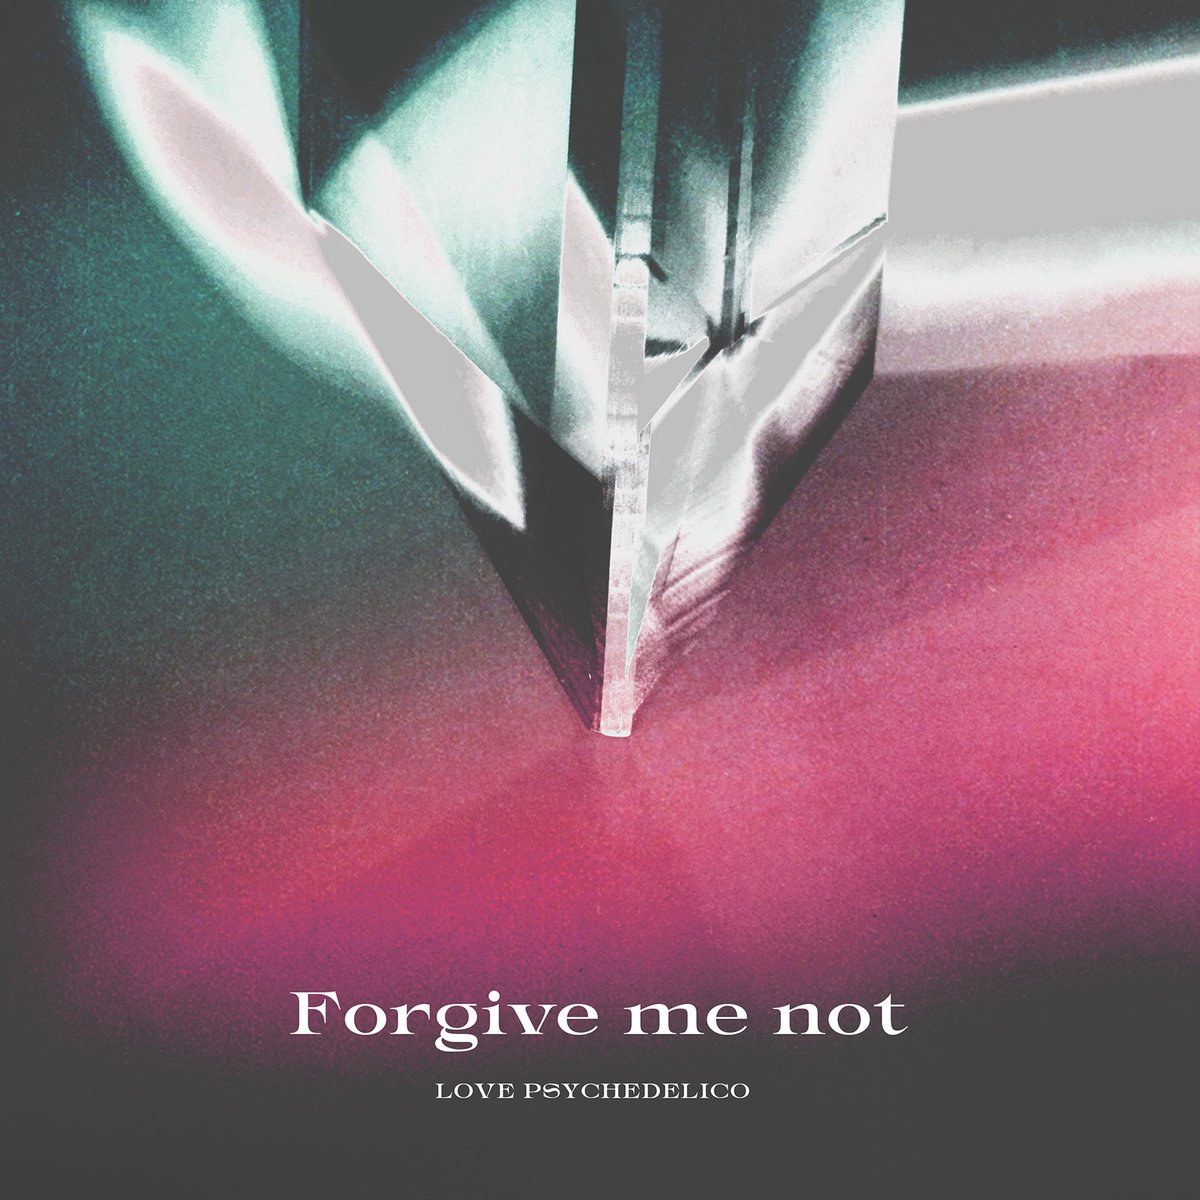 LOVE PSYCHEDELICO Has Digitally Released 'Forgive me not,' a Theme Song from the Drama 'Shanai Shokeinin!' Lyric Video Also Out Now! 

jvcmusic.lnk.to/Forgivemenot
youtu.be/gQvx4TP-3X8

@edge_ktv @delicoofficial
#LOVEPSYCHEDELICO #社内処刑人 #Jdrama #Jrock #jpop #MusicChannel_J